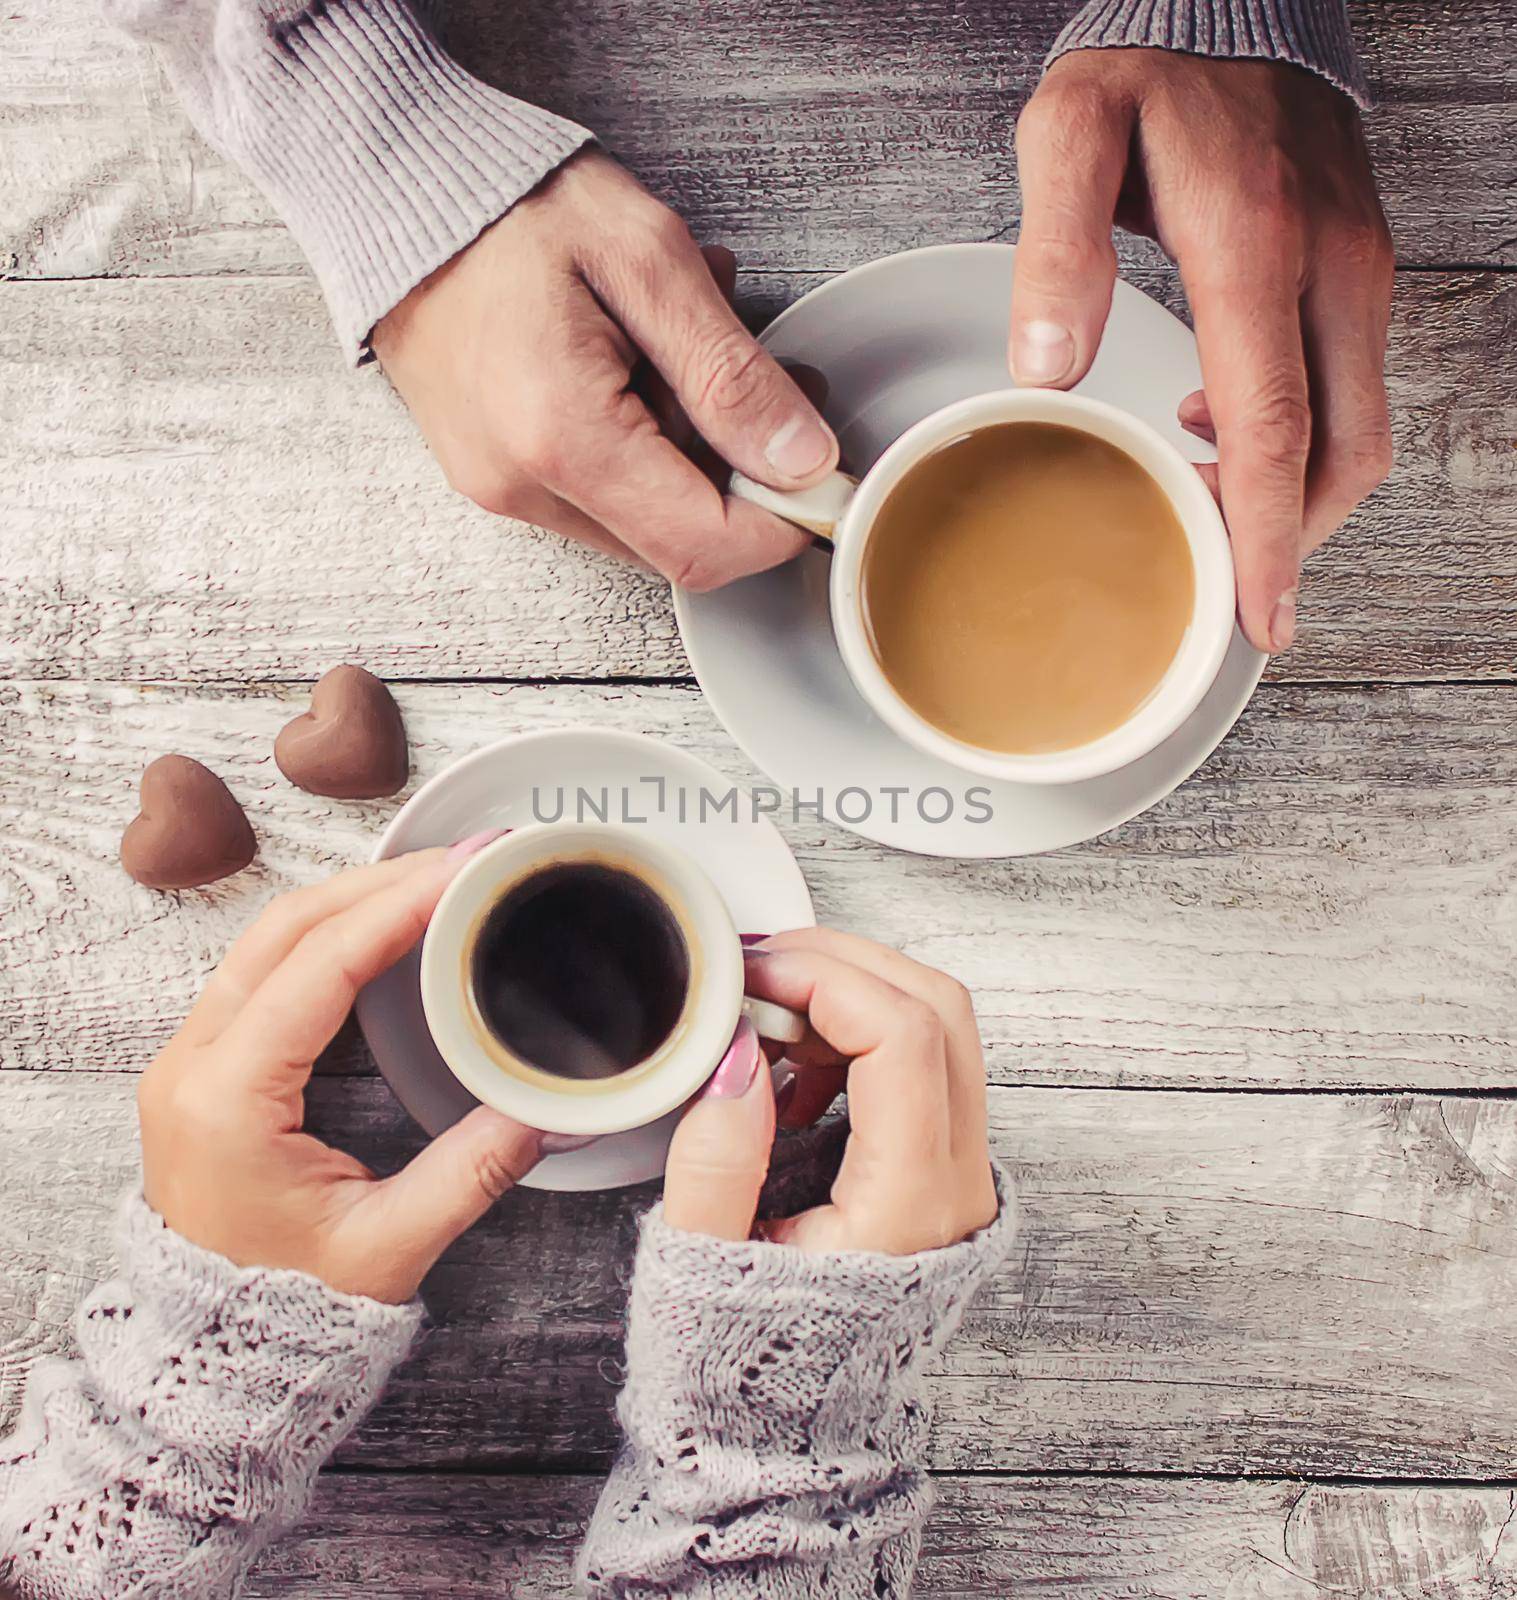 A cup of coffee. Selective focus. Couple. by yanadjana